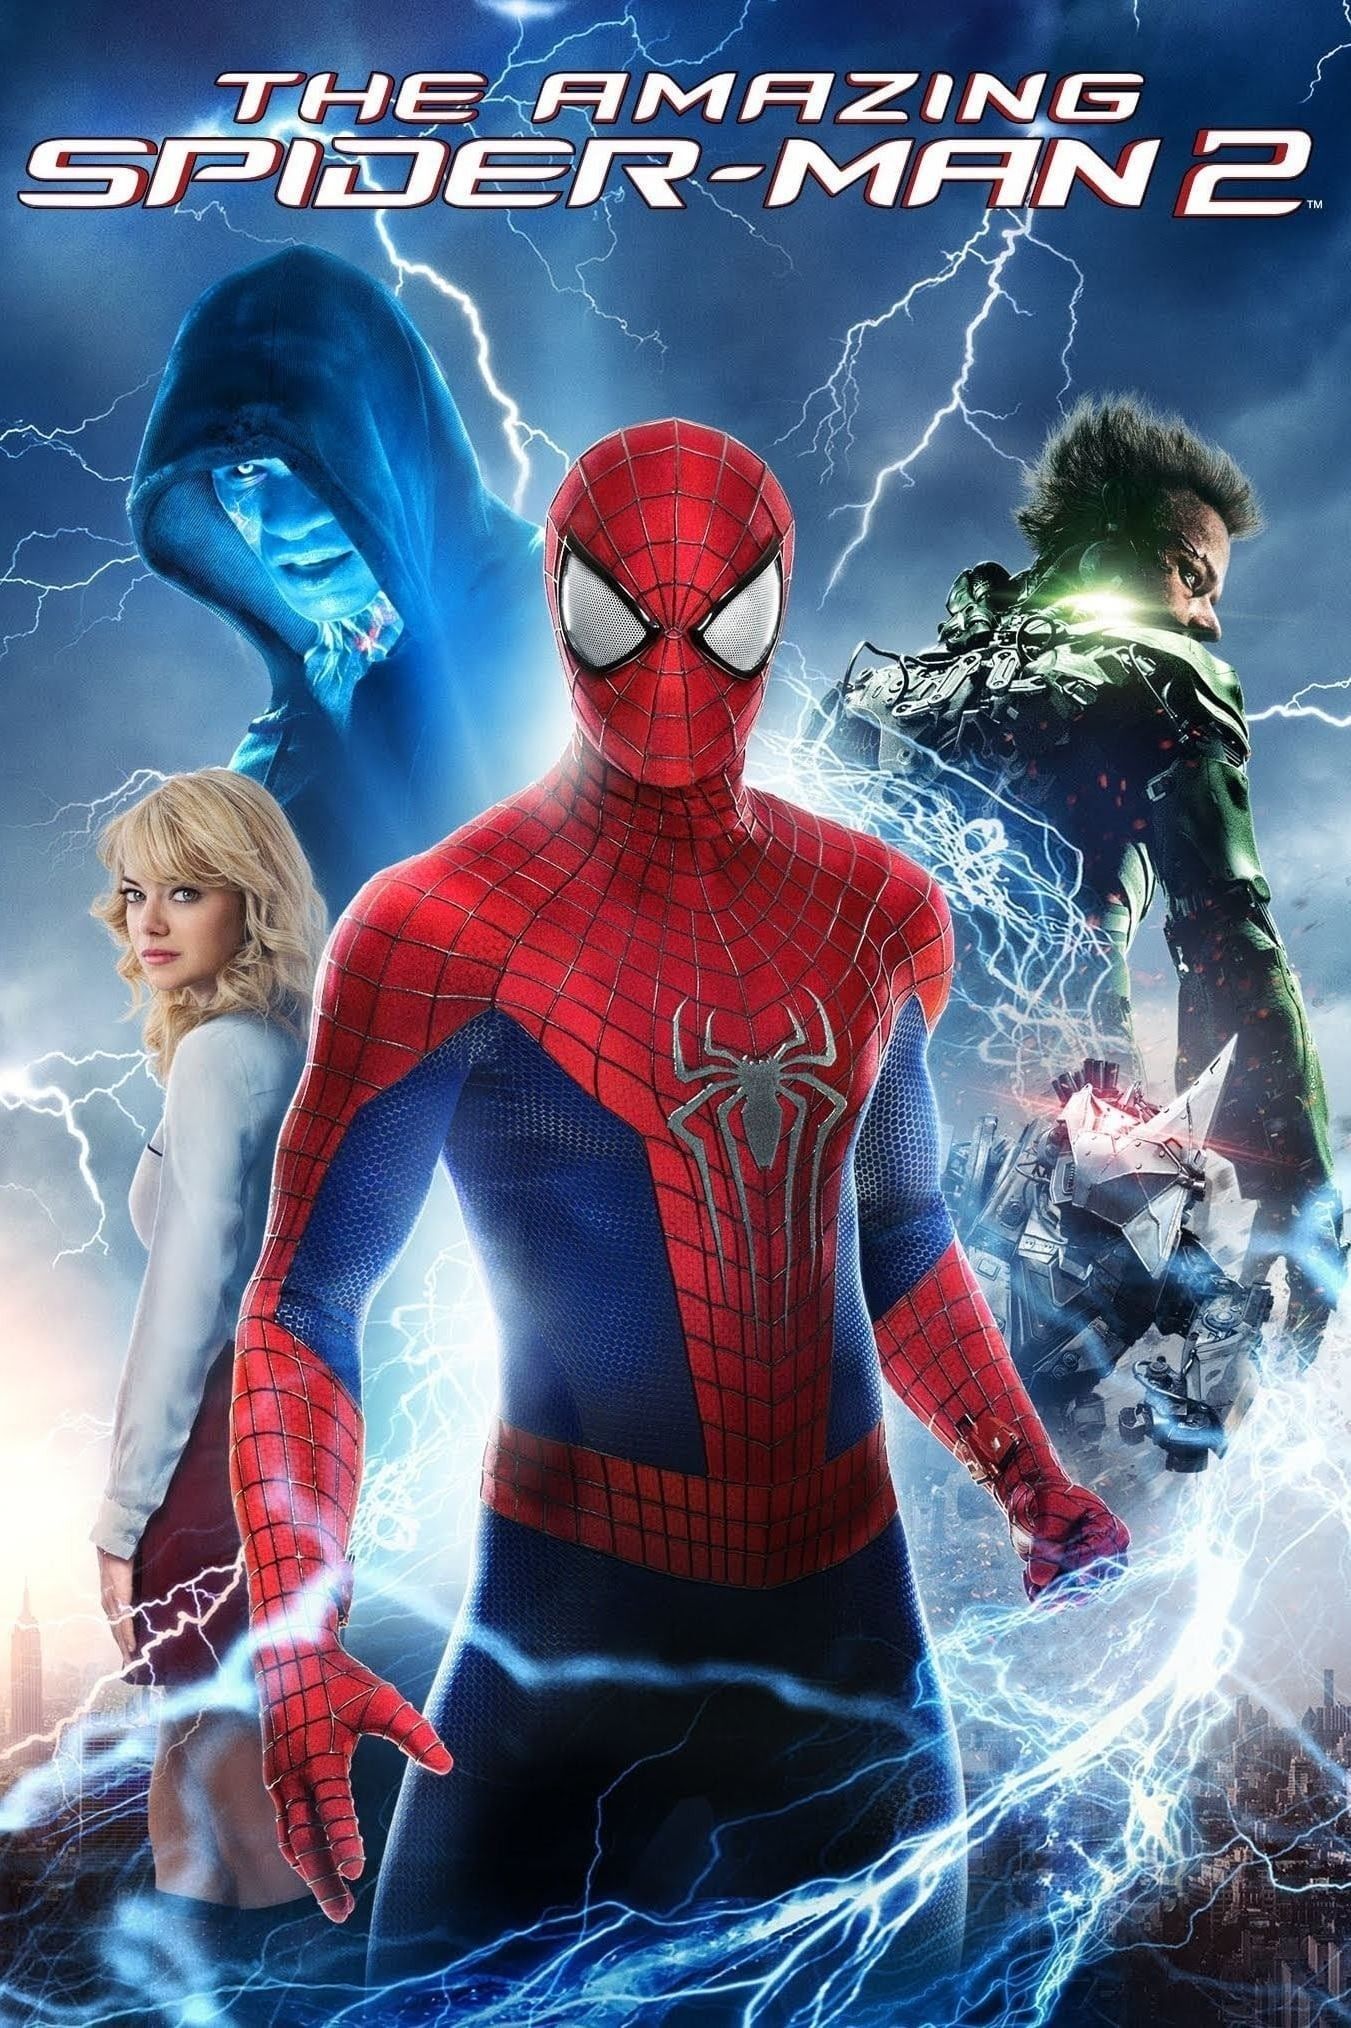 Spider-Man Movies, Ranked - What Is The Best Spider-Man Movie Ever?